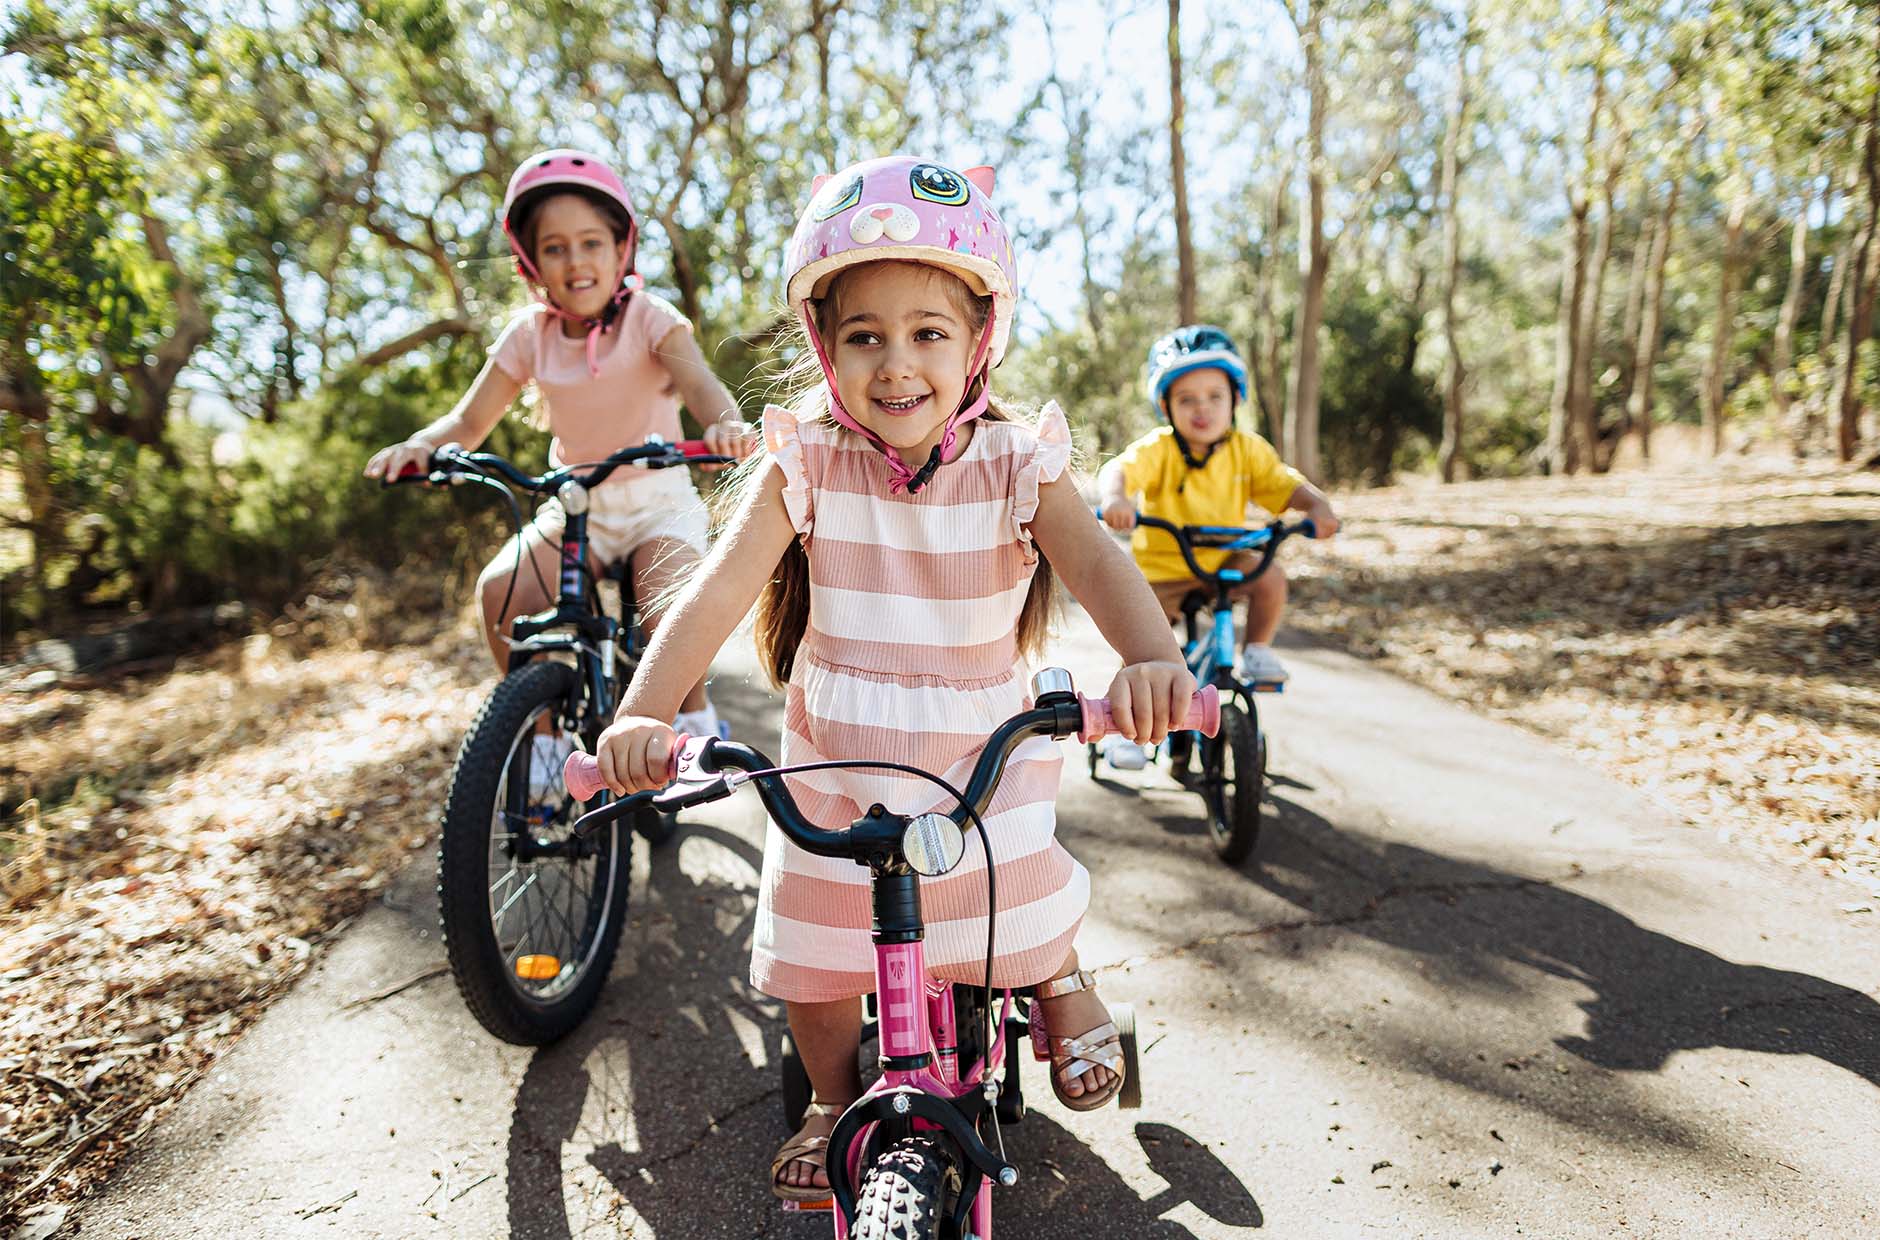 The Glades, Byford young children riding their bike